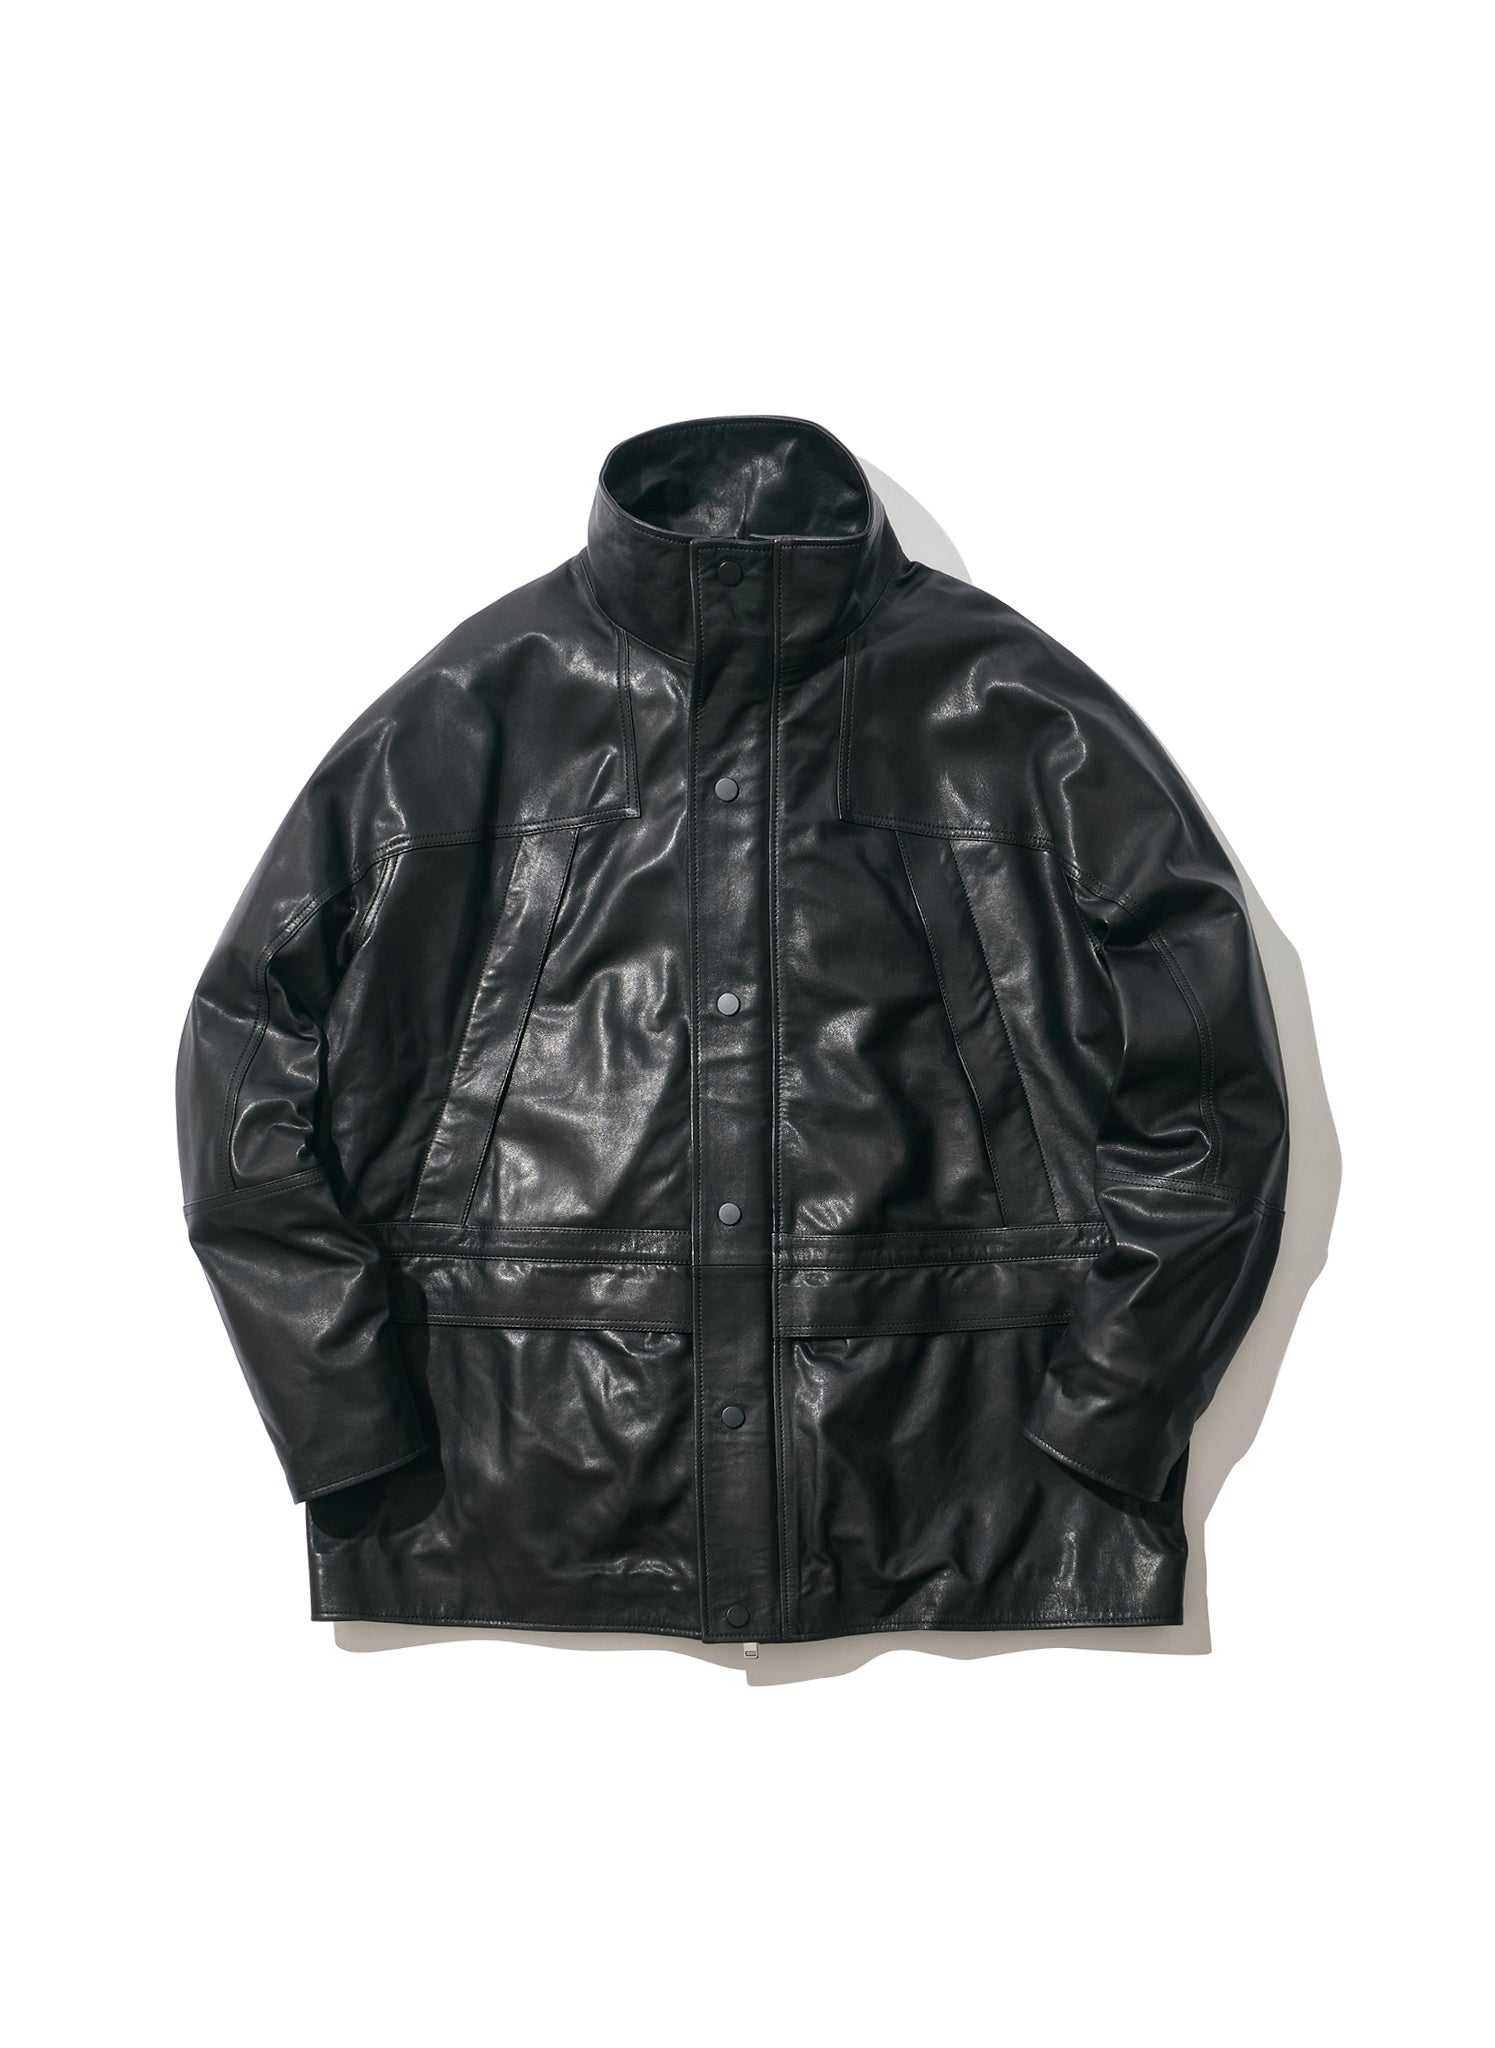 <span style="color: #f50b0b;">Last One</span> WILLY CHAVARRIA / MOUNTAIN JACKET BLACK LAMB LEATHER